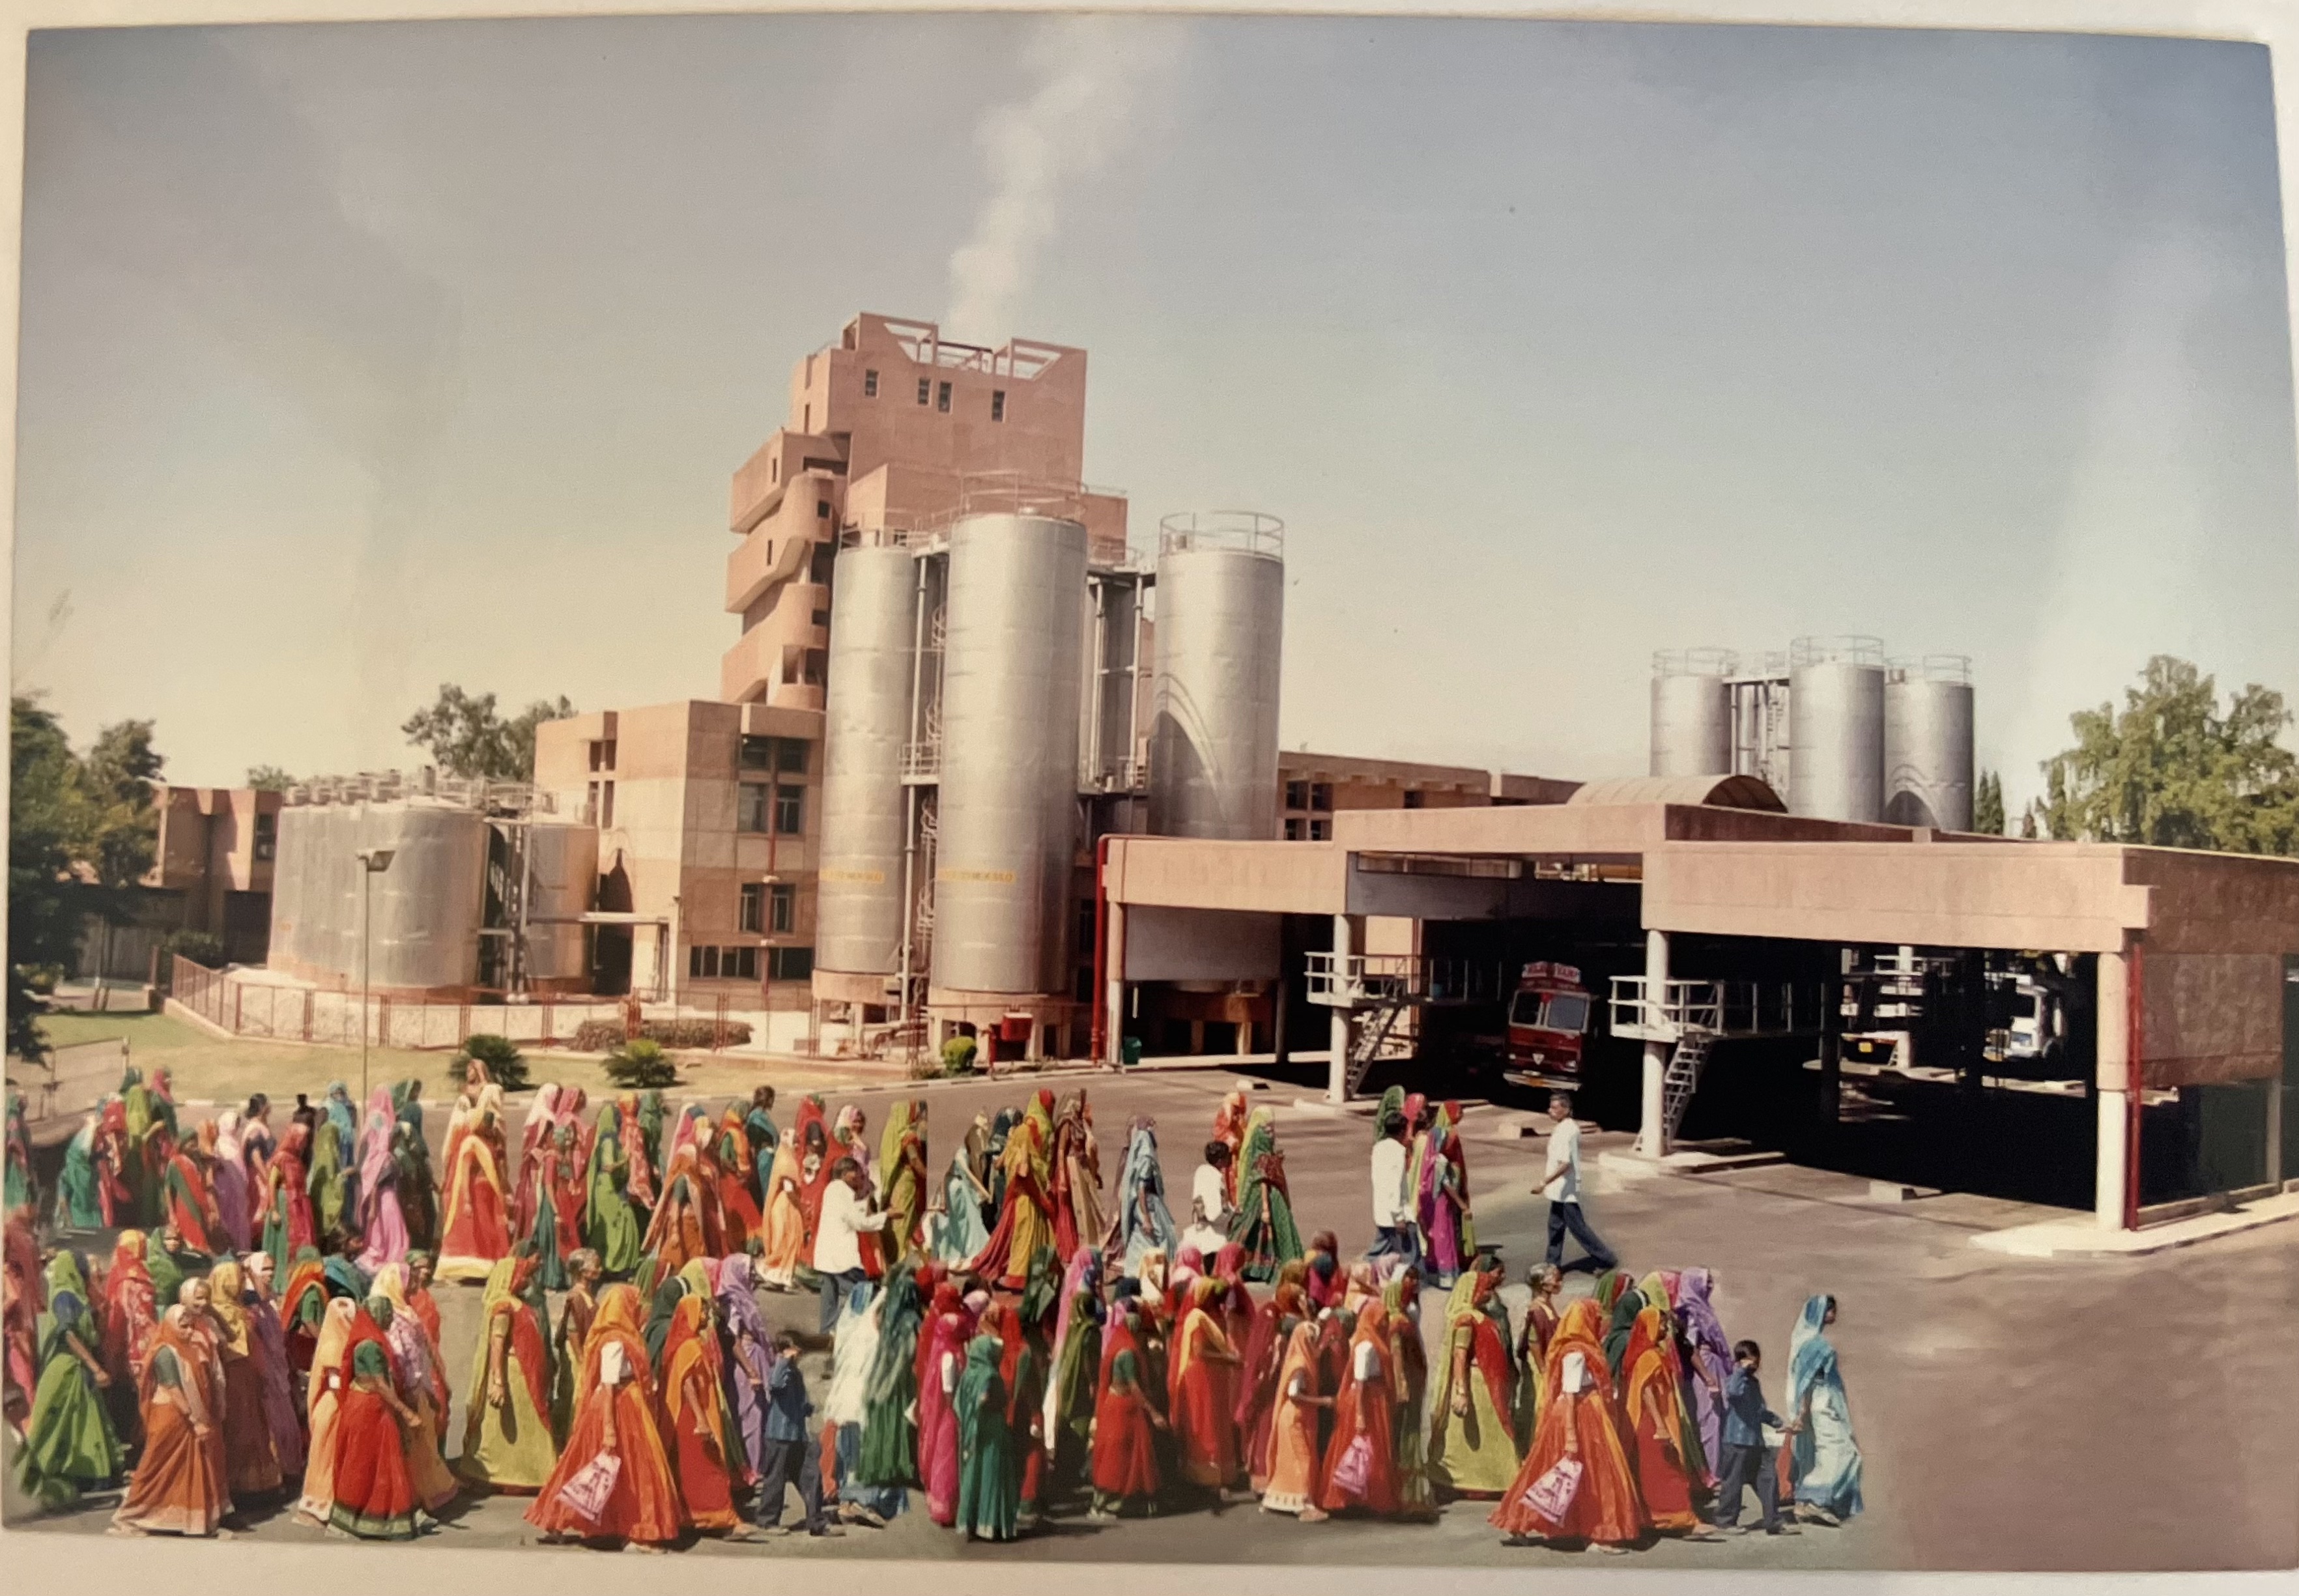 A vintage photo of women in colorful saris lined up in front of an industrial facility.